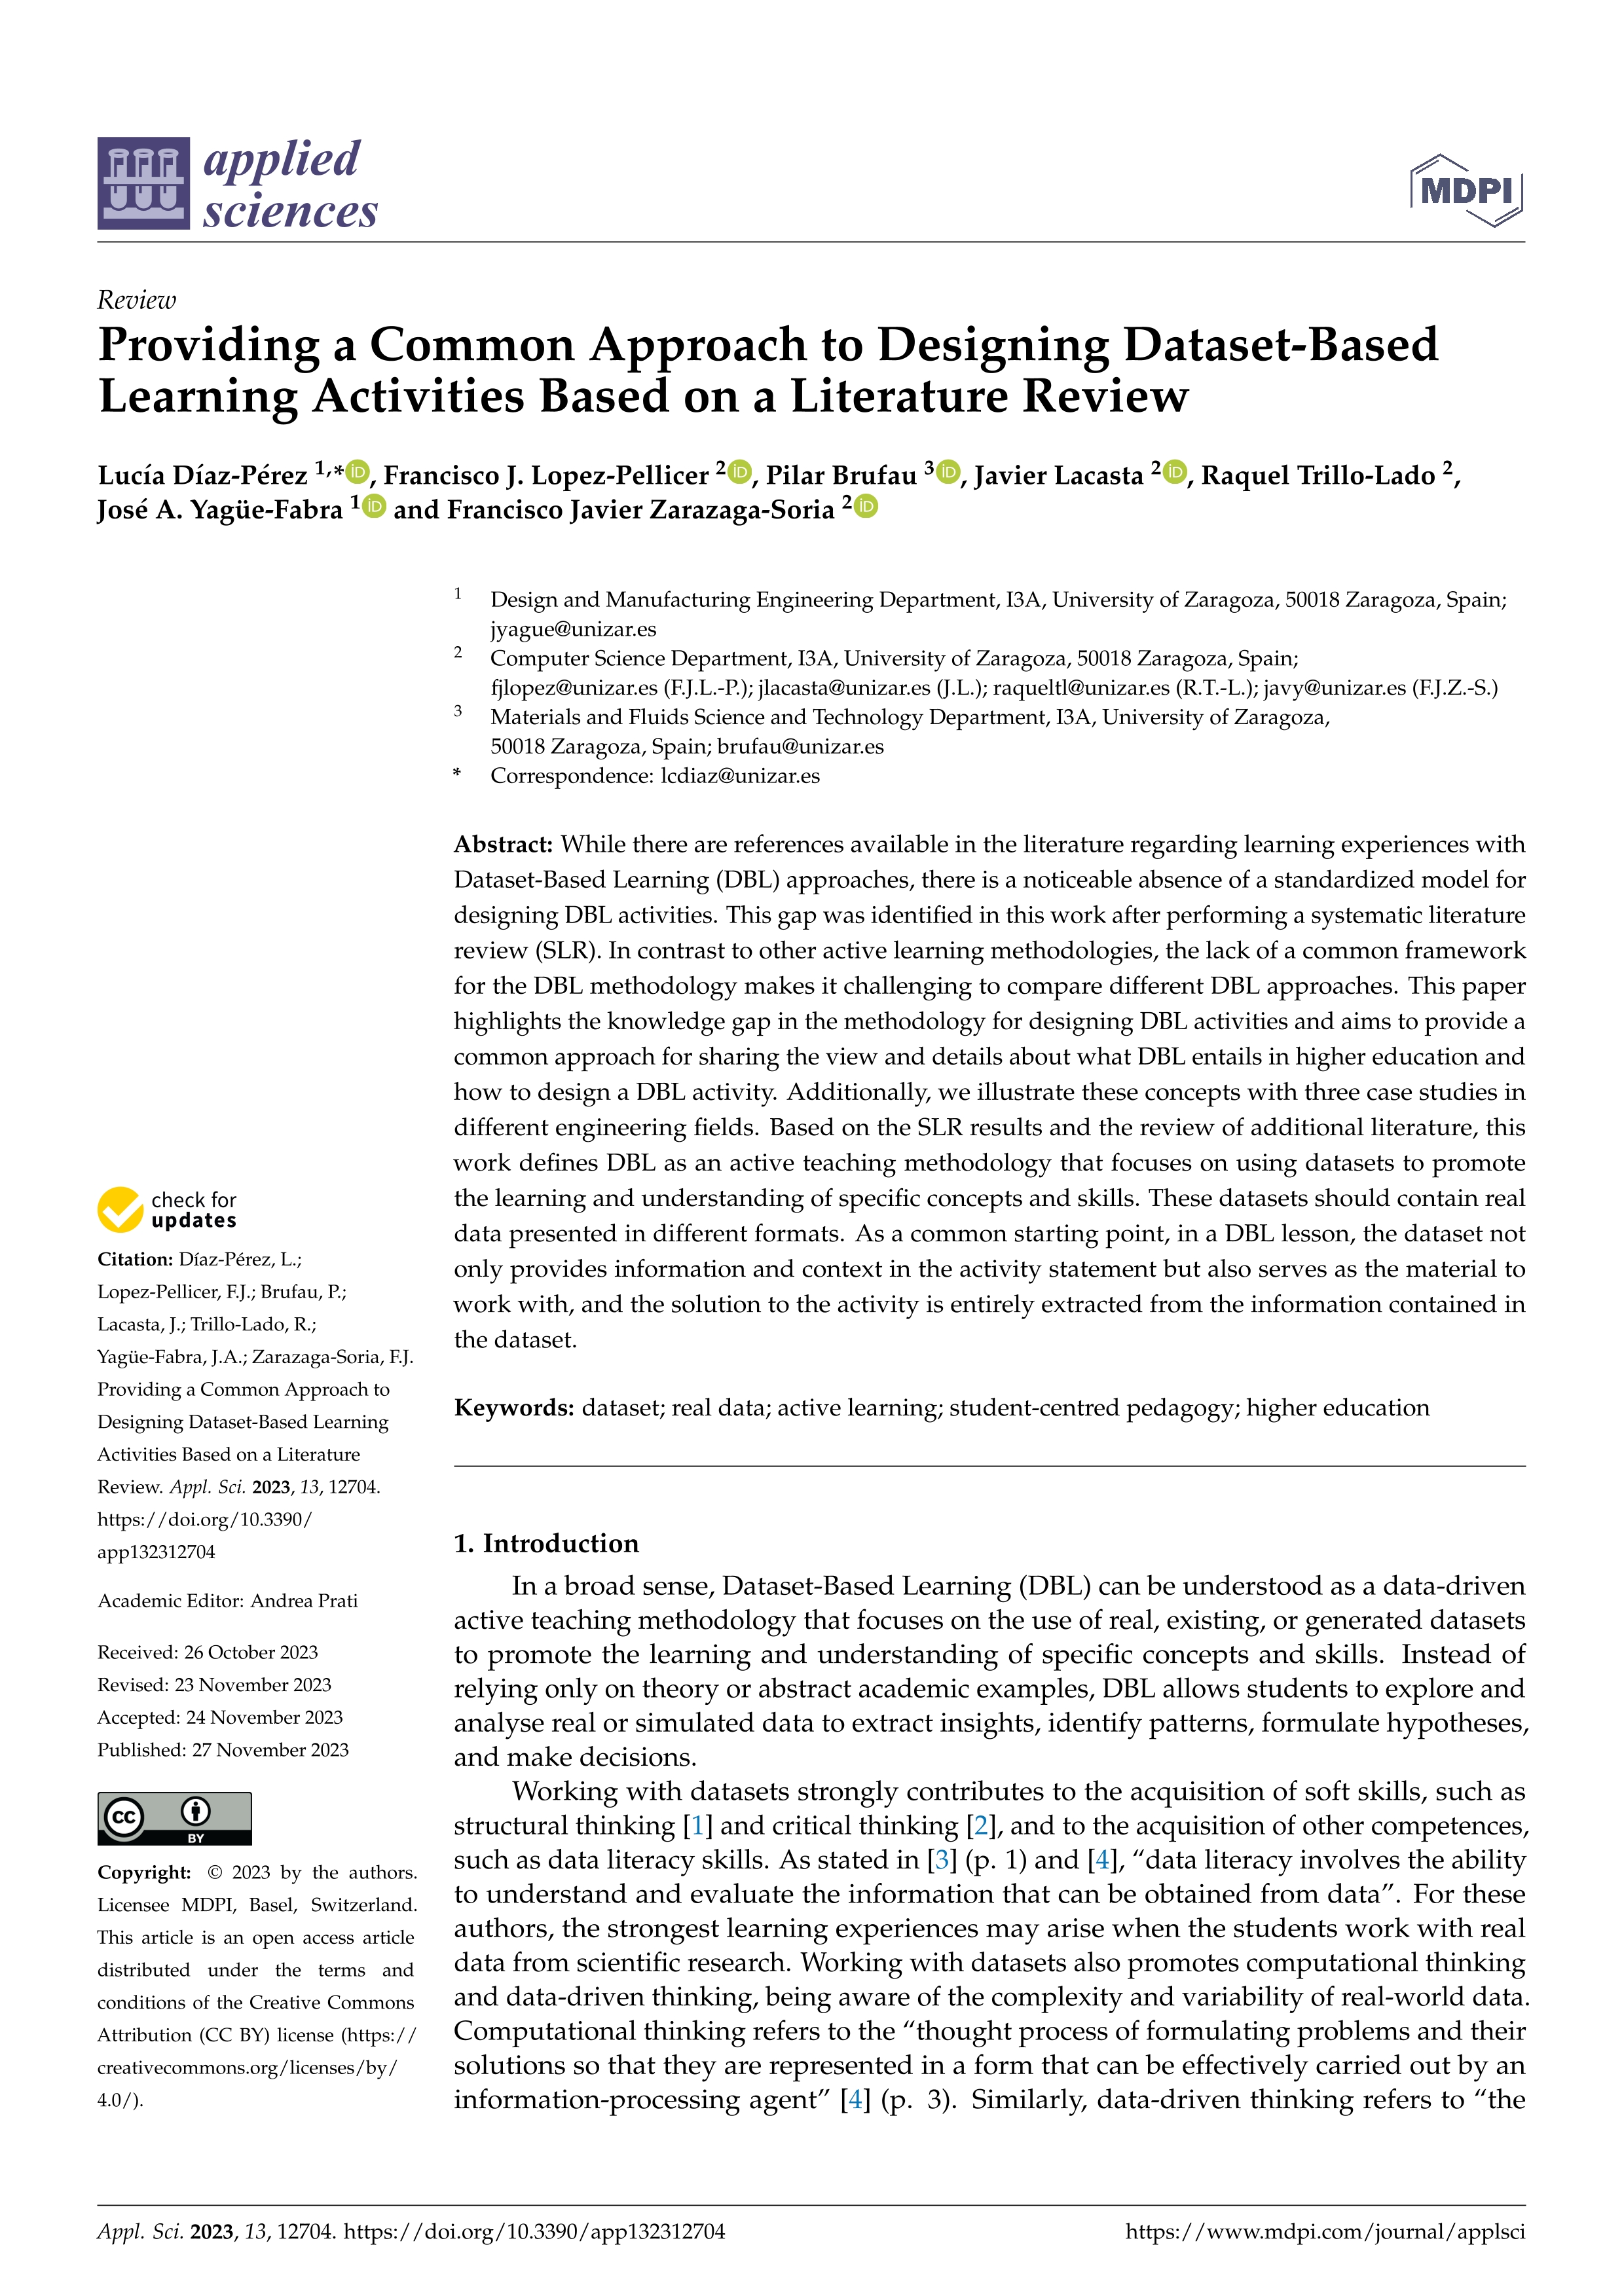 Providing a Common Approach to Designing Dataset-Based Learning Activities Based on a Literature Review